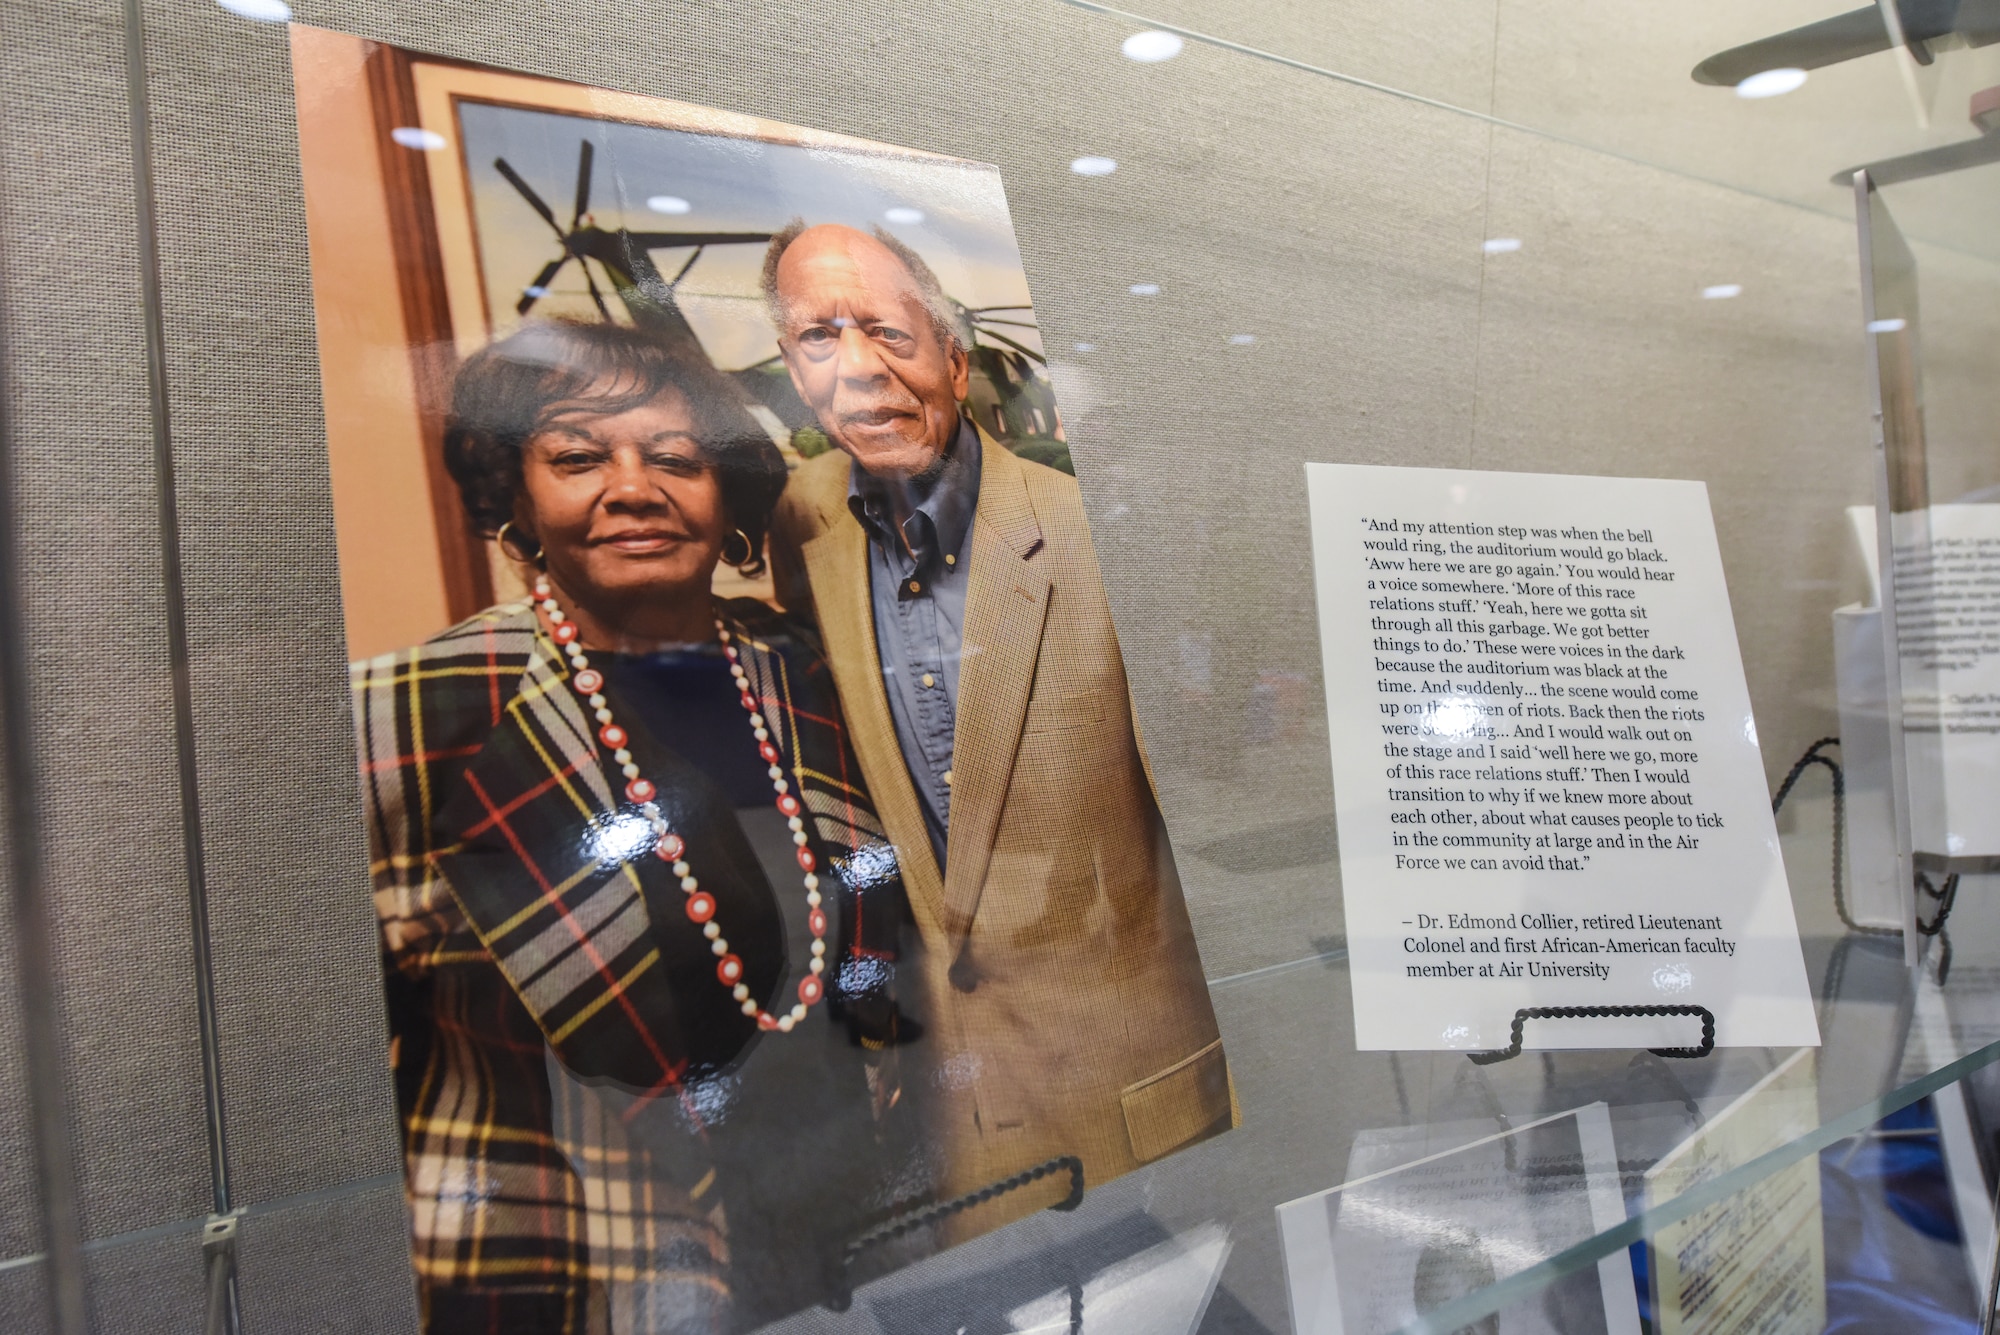 Dr. Edmond Collier, retired lieutenant colonel and first African – American faculty member at Air University, and his wife, Alma, are featured in the “Maxwell and the Movement” exhibit at the Muir S. Fairchild Research Information Center, Feb. 21, 2019, Maxwell Air Force Base, Alabama. Collier’s impact on Air University’s history was validated with his inclusion in the exhibit, Collier and his wife both said that they greatly enjoyed their time at AU. (U.S. Air Force photo by Senior Airman Alexa Culbert)